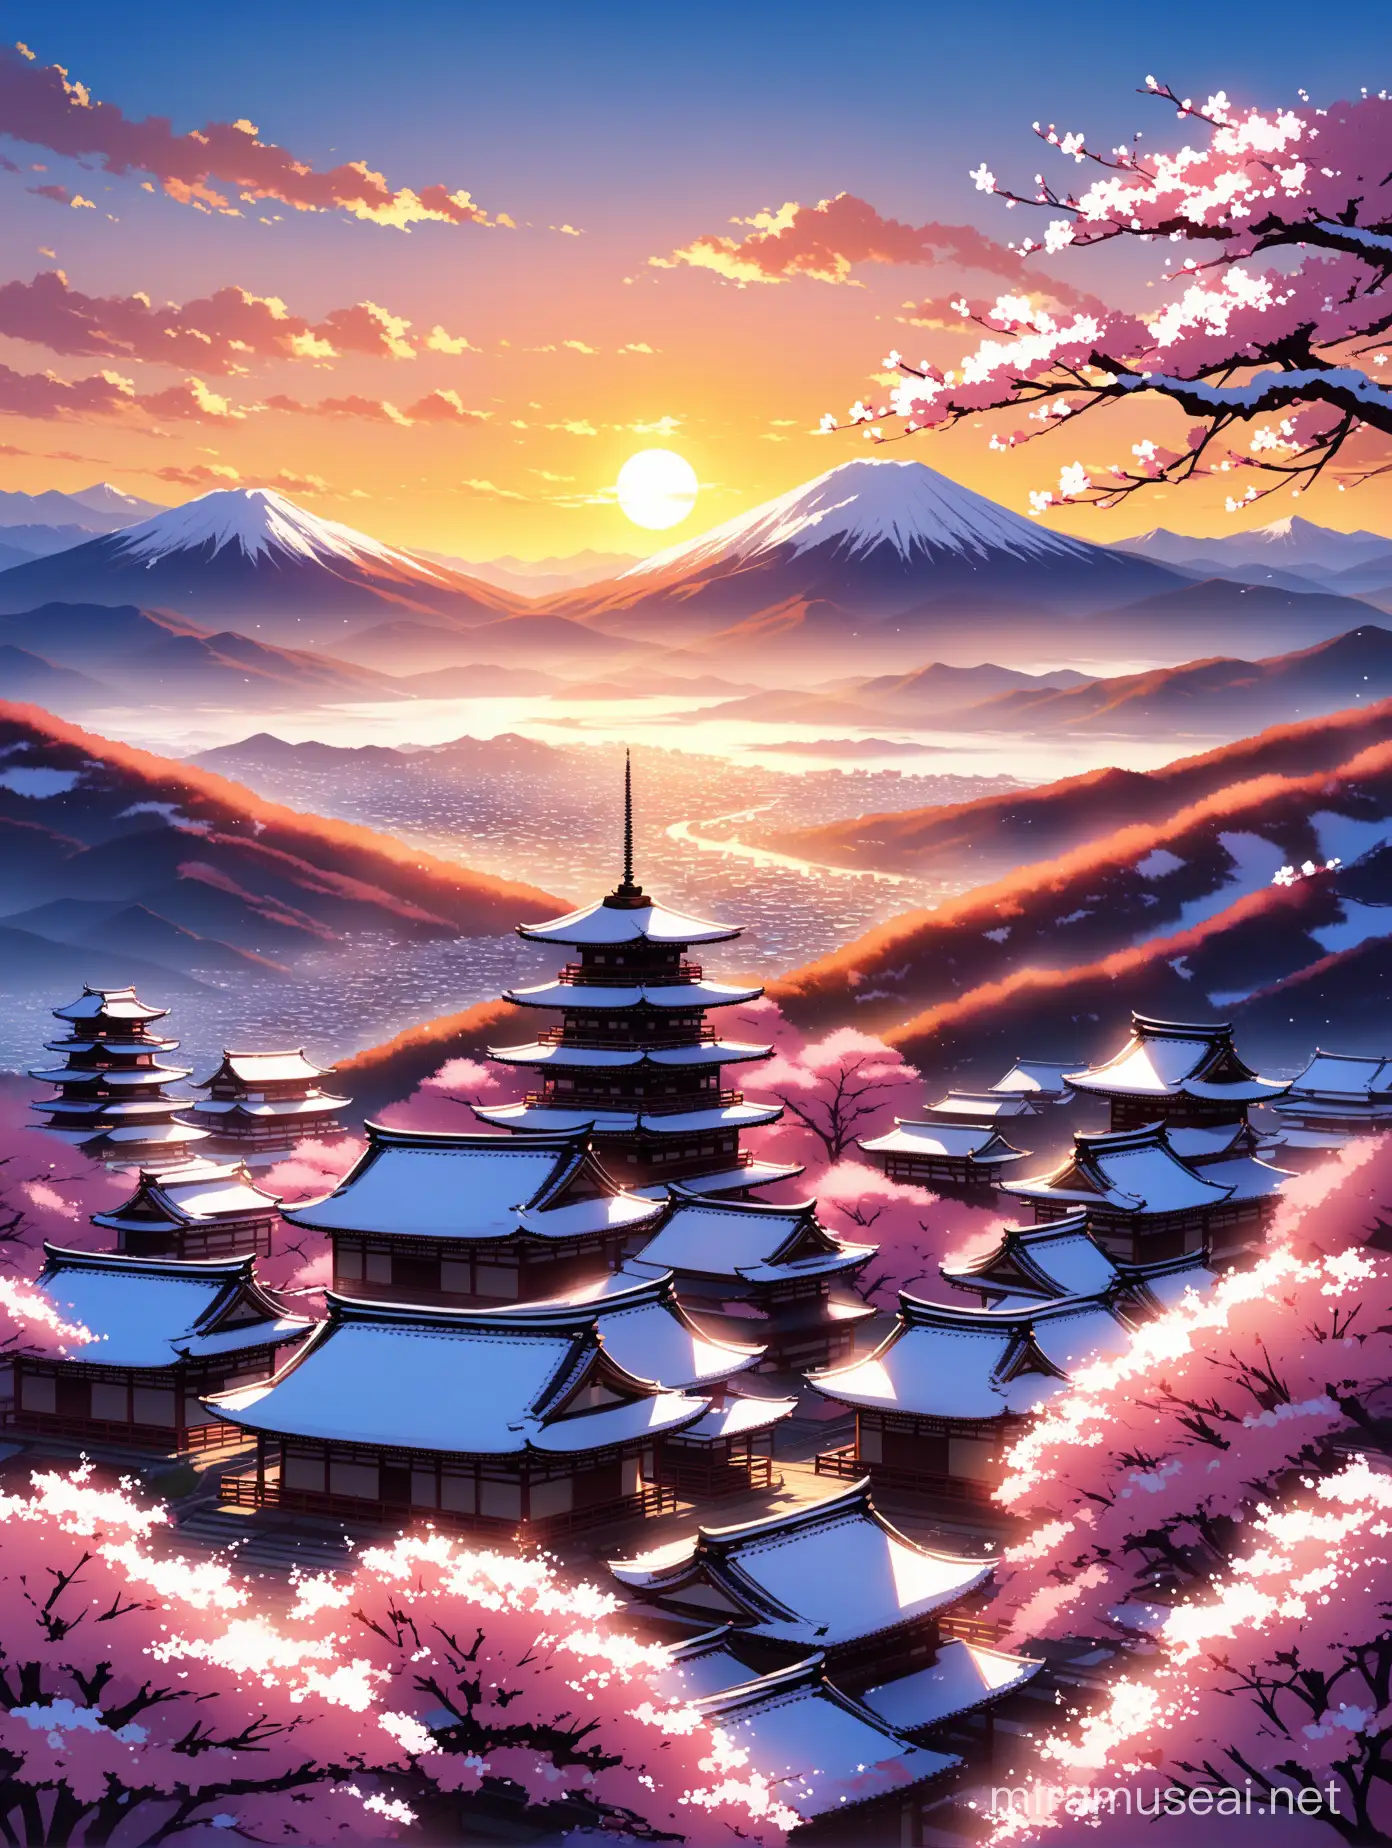 Scenic Sunset View of Traditional Japanese Village with Sakura Trees and Snowy Mountains